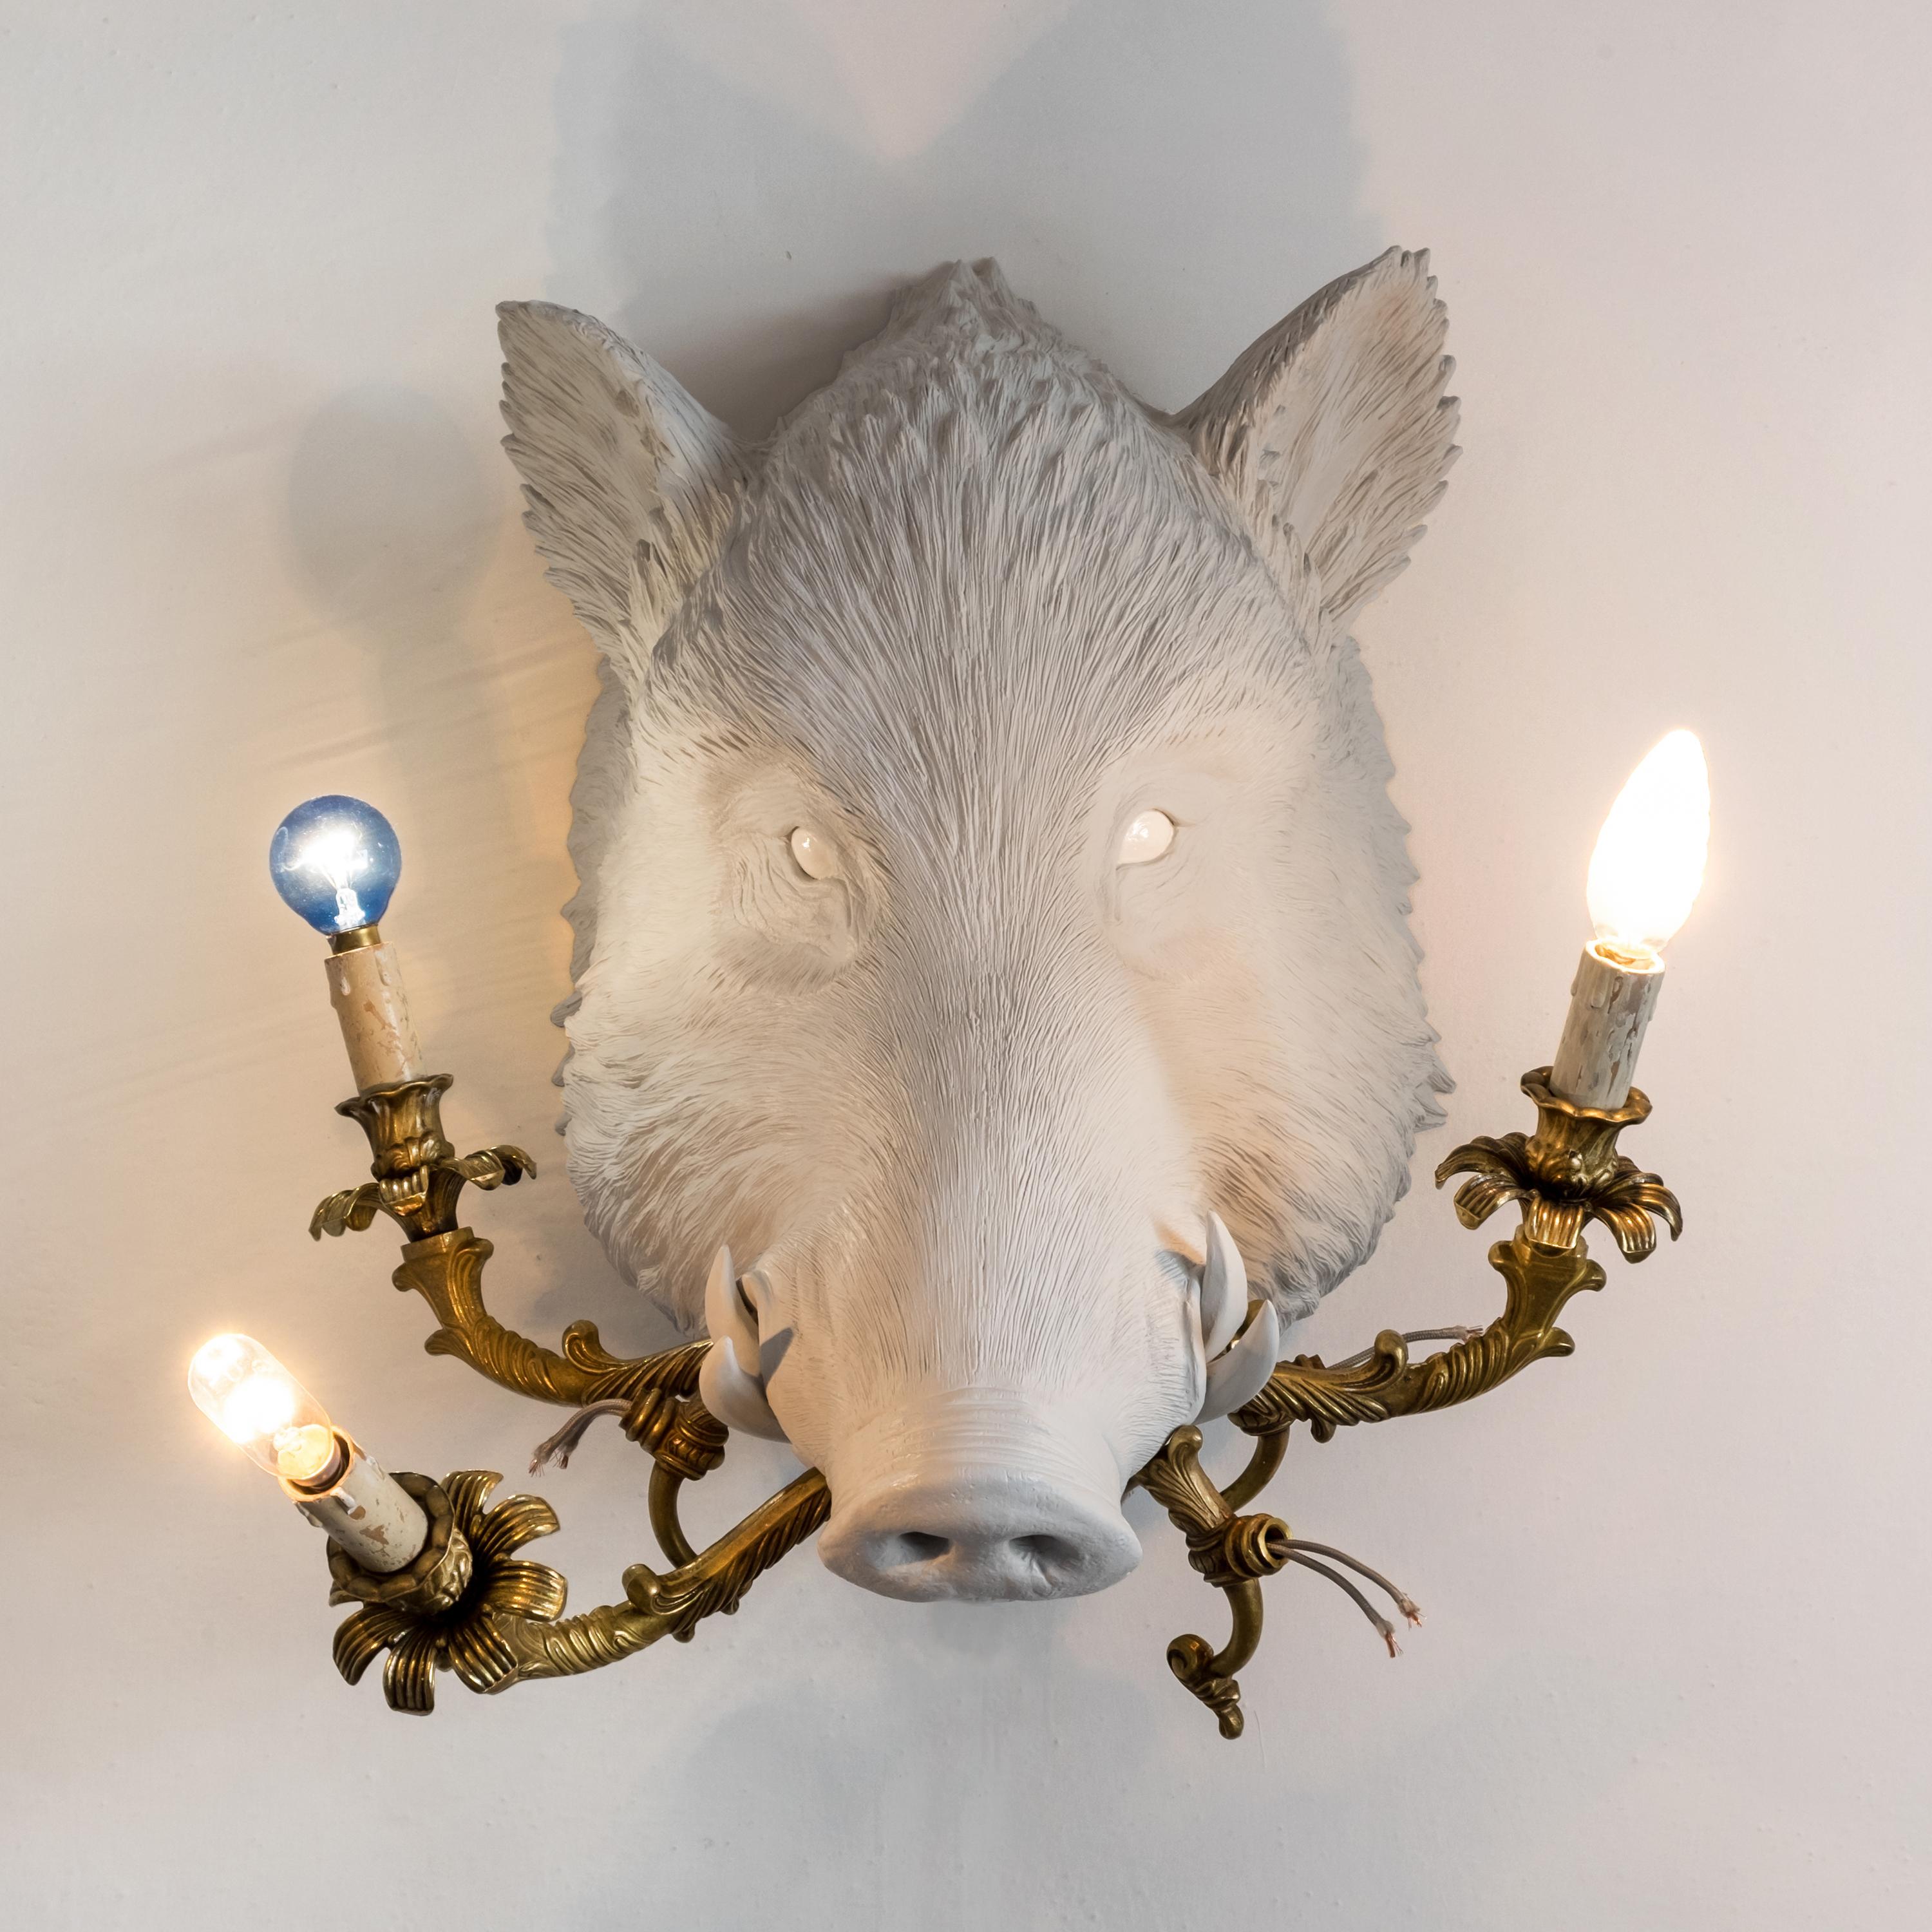 Contemporary 21st Century Boar Lamp Light by Marcantonio, White Painted Fiberglass Resin For Sale